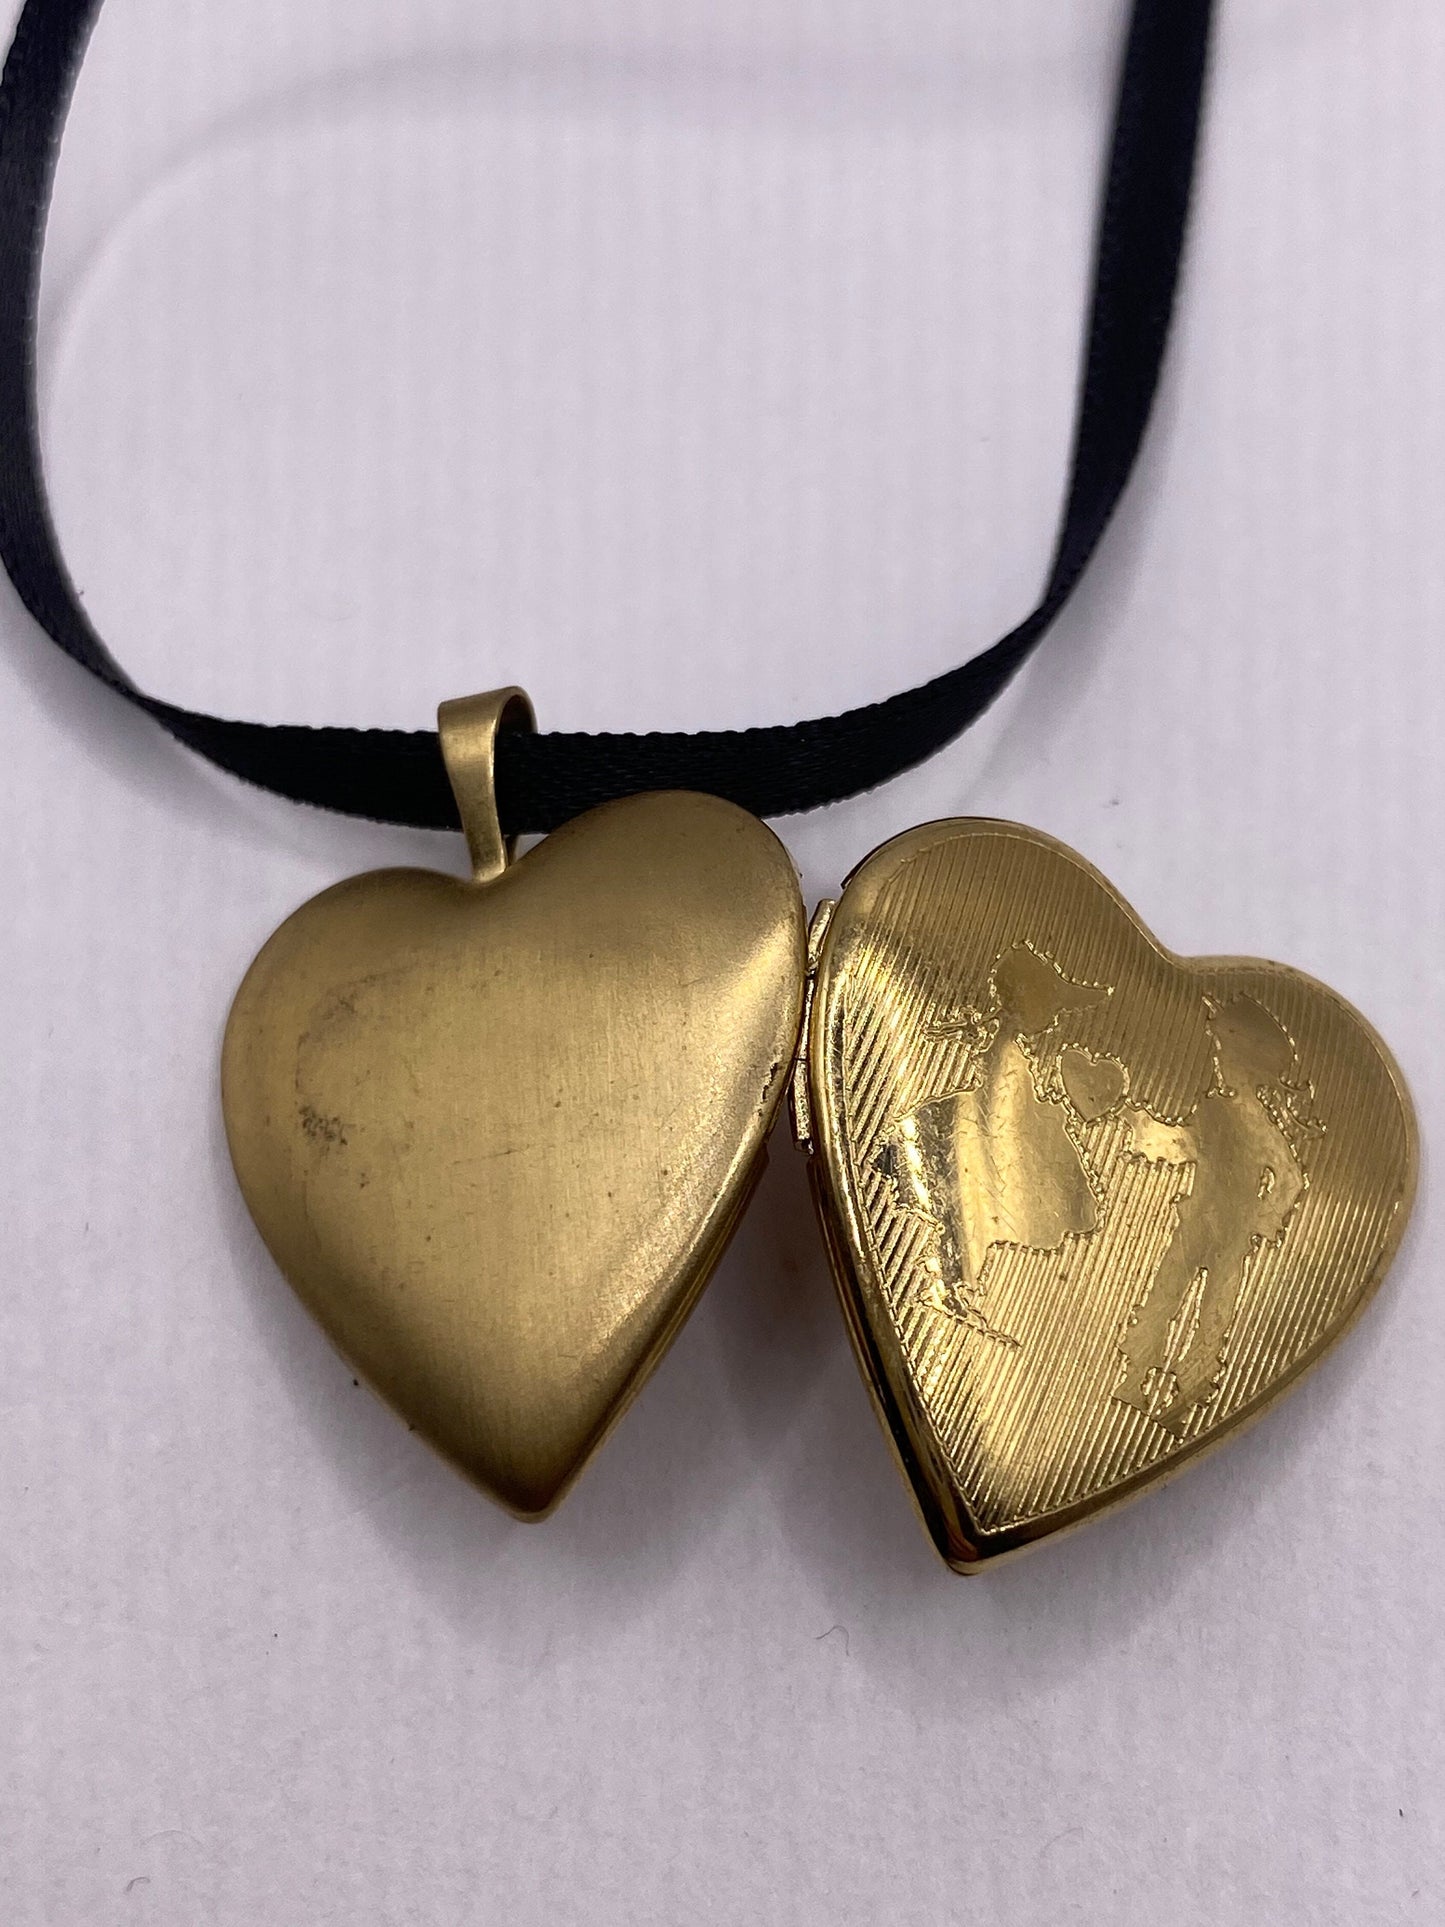 Vintage Gold Locket | Tiny Heart 9k Gold Filled Pendant Photo Memory Charm Engraved Sweethearts | Choker Necklace